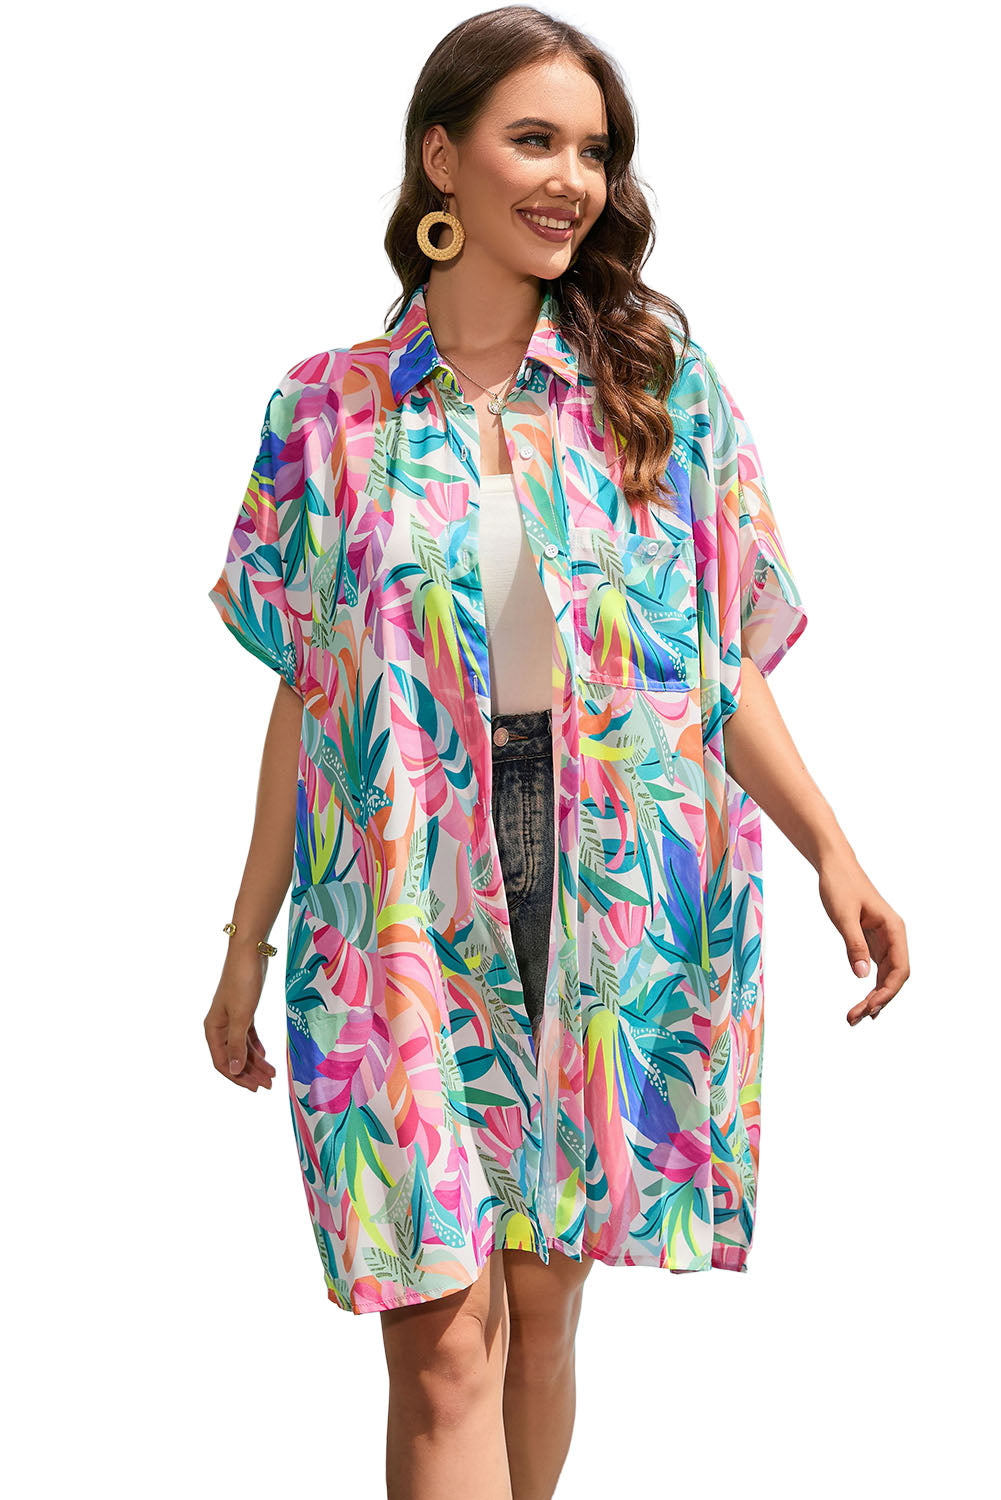 Multicolor Plant Print Button-up Half Sleeve Beach Cover Up